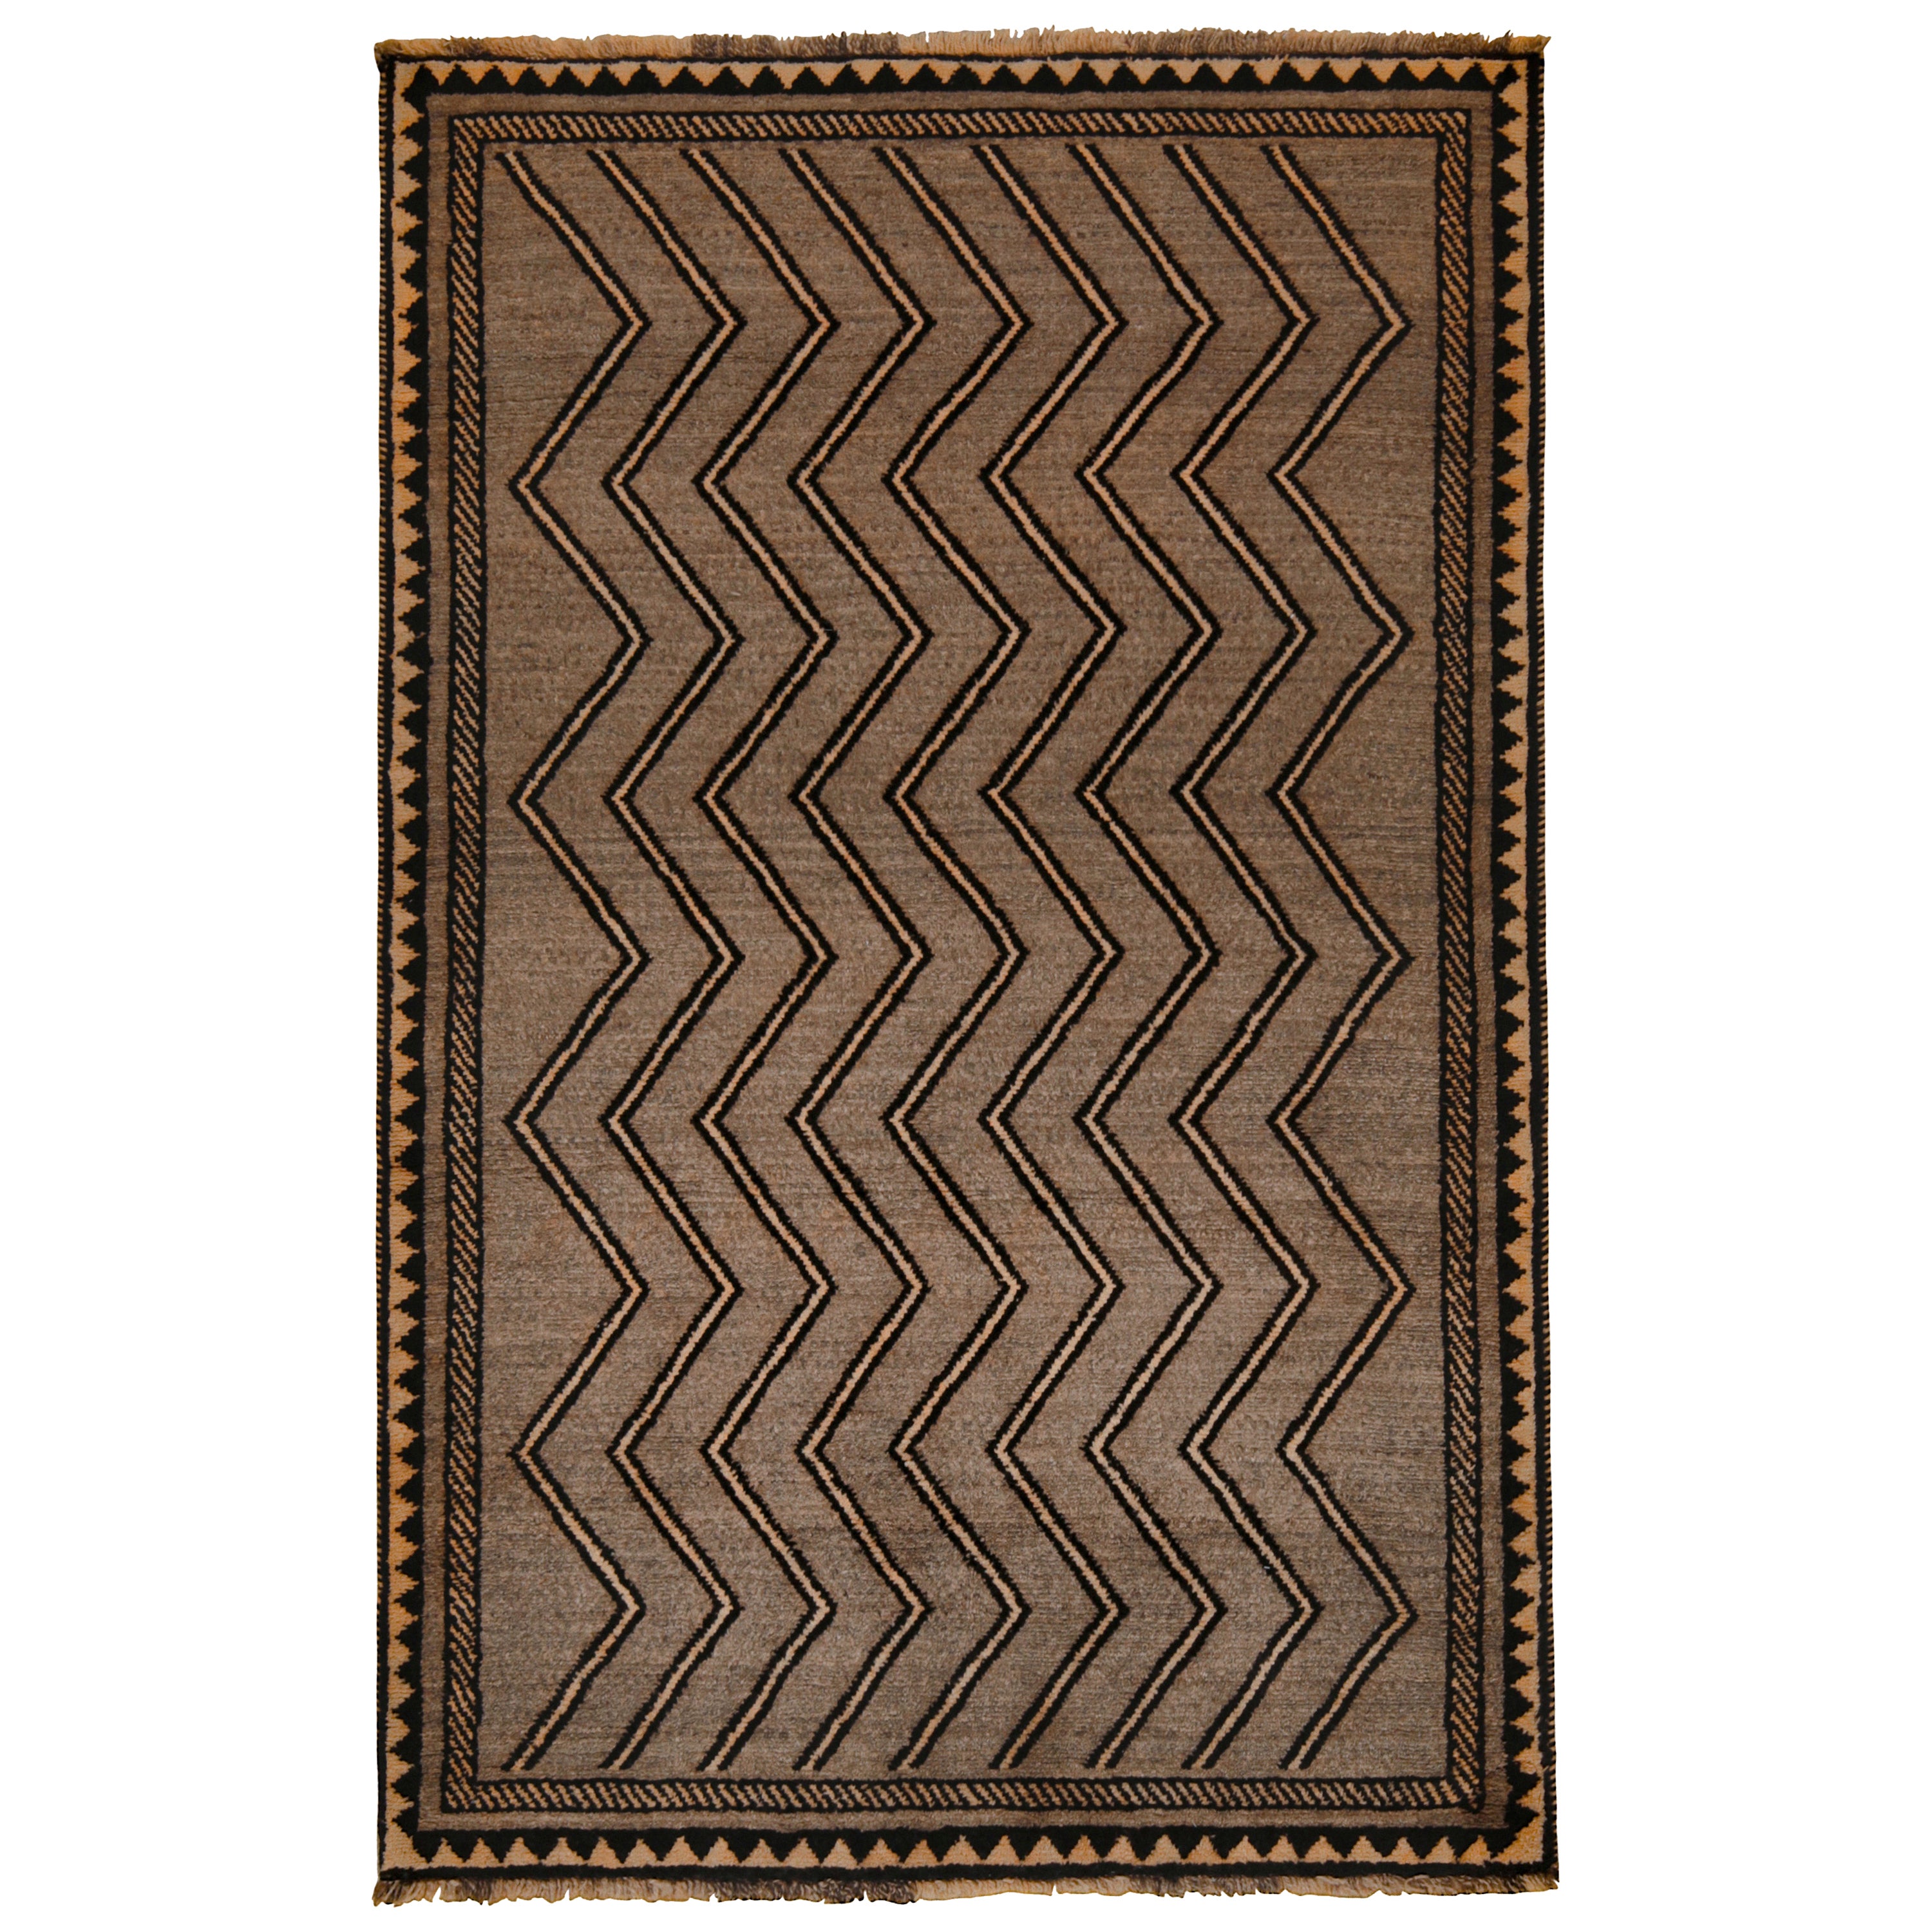 Vintage Gabbeh Tribal Rugs in Beige with Chevron Patterns - by Rug & Kilim For Sale